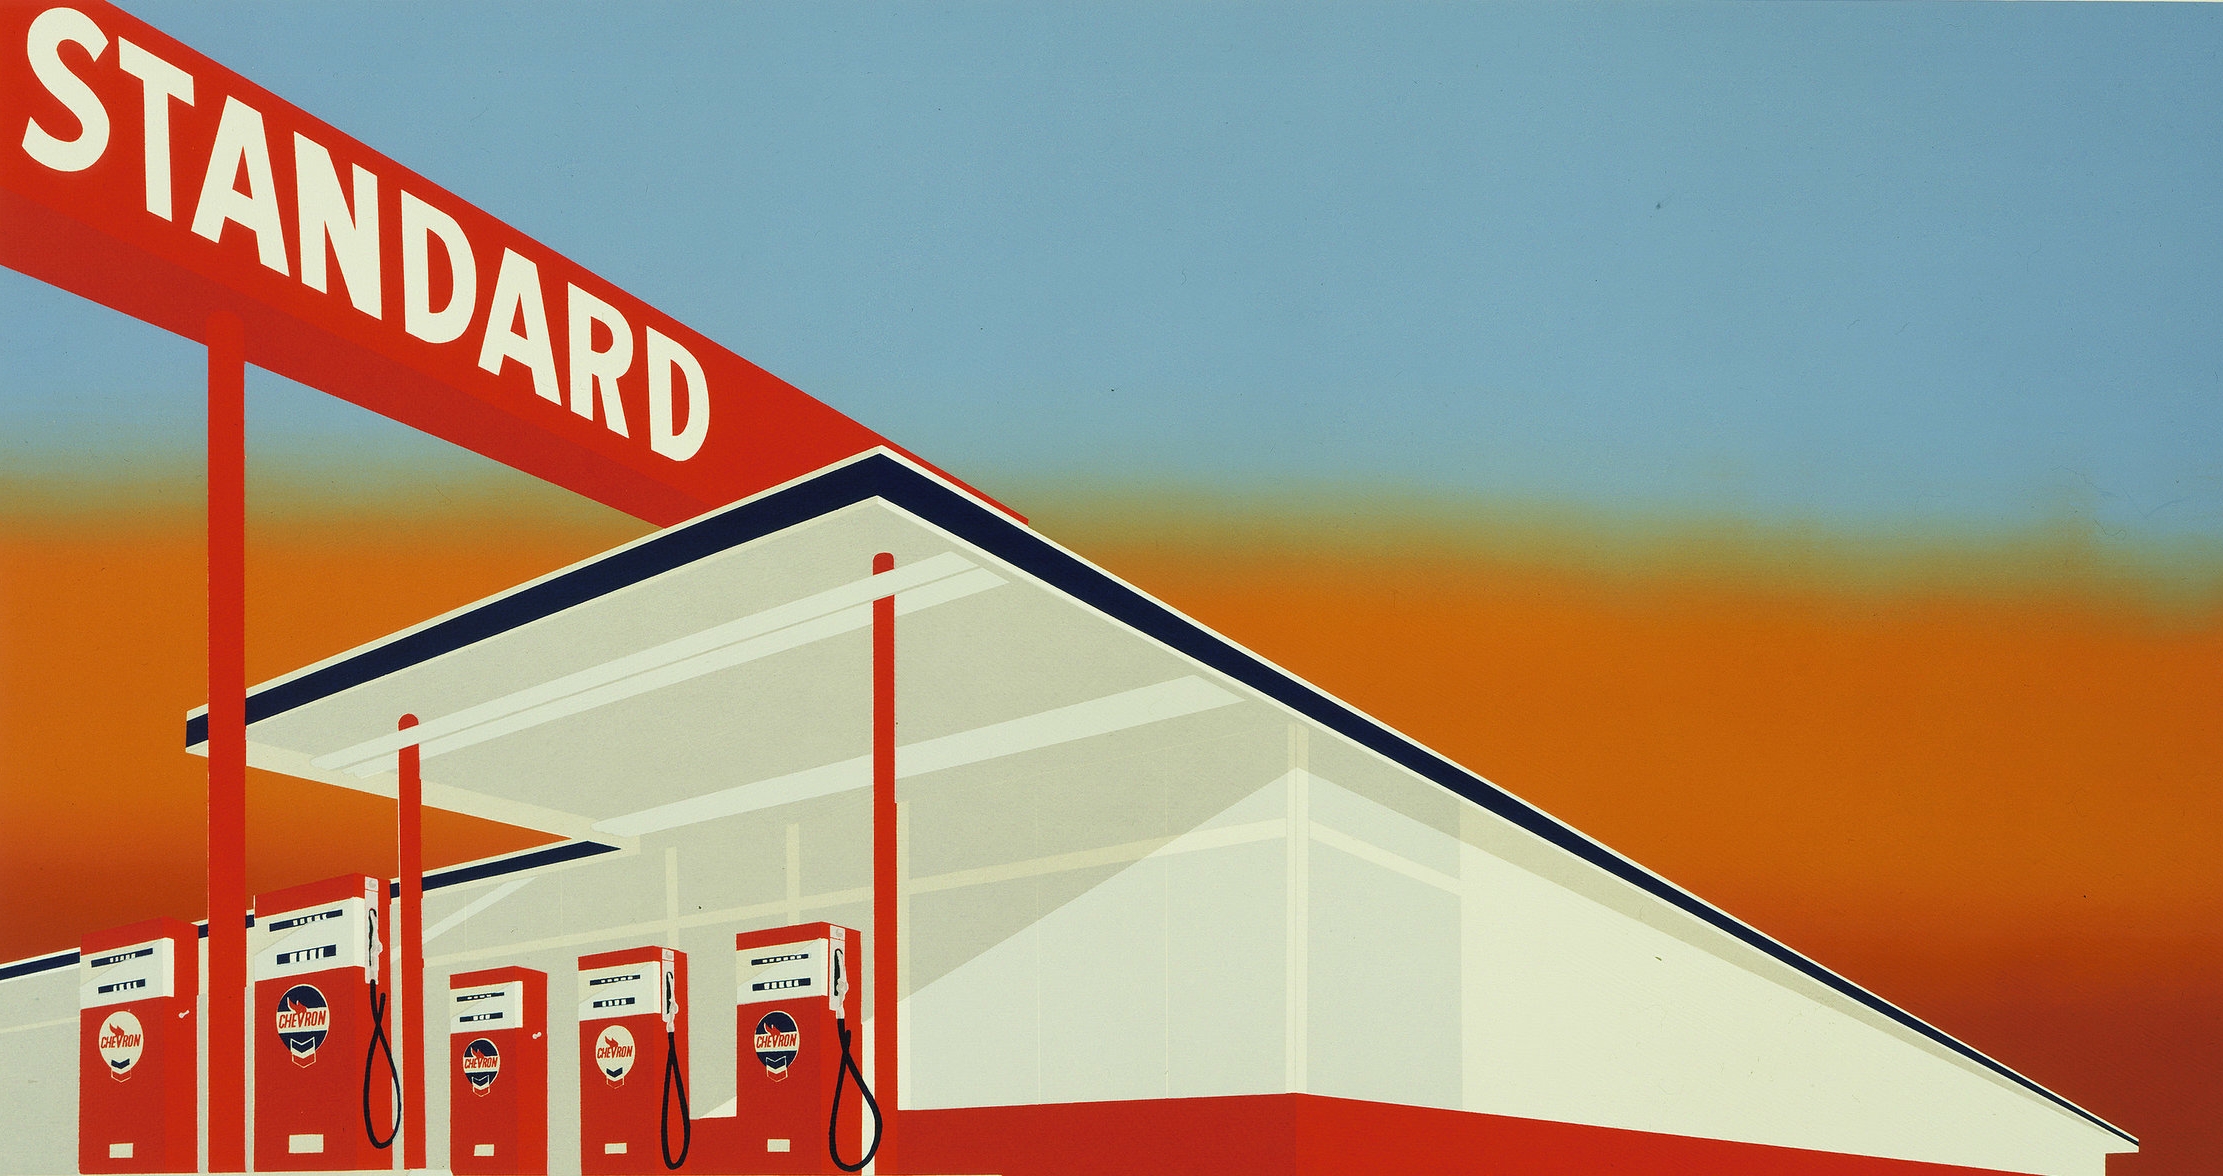  Edward Ruscha's 1966 print  Standard Station &nbsp;is one of 200 works that were brought together for the British Museum's major spring exhibition for 2017,&nbsp;  The American Dream: from pop to present .  It was the Museum's first headline show to